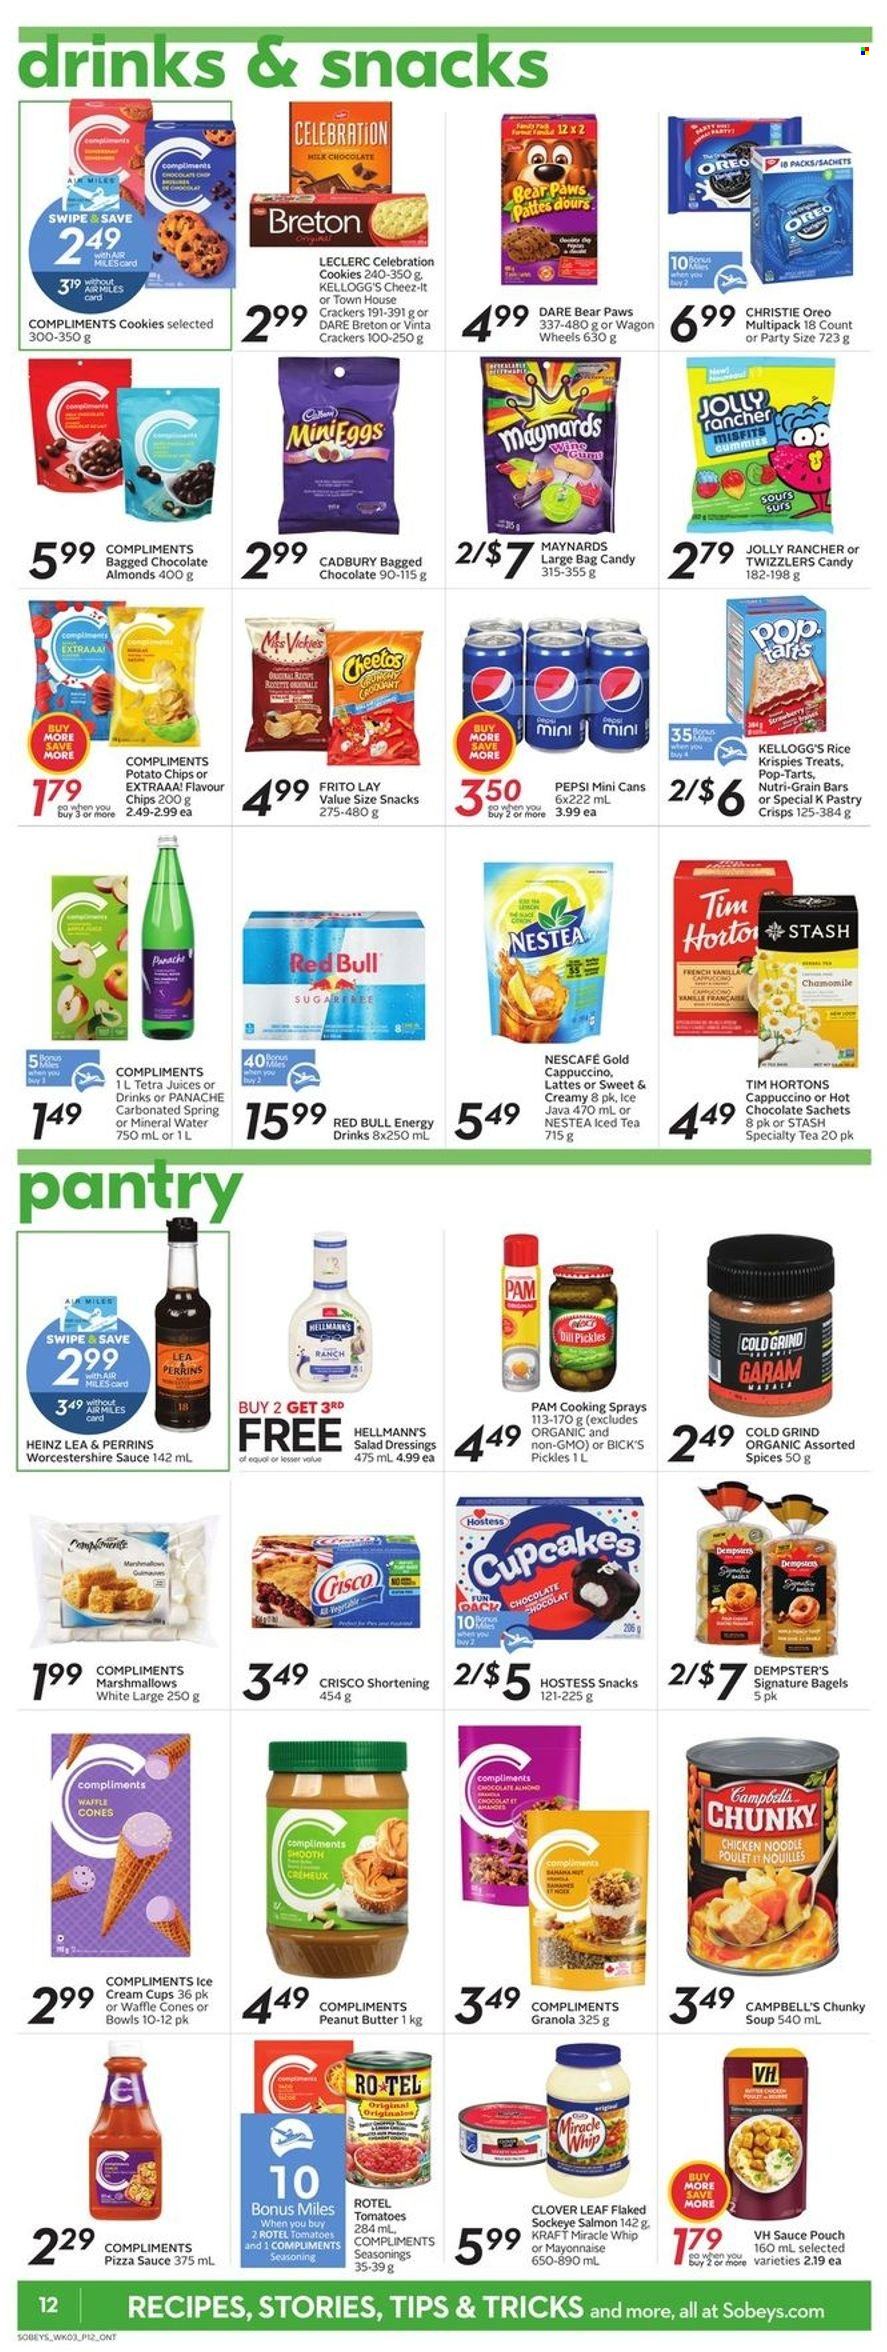 thumbnail - Sobeys Flyer - May 19, 2022 - May 25, 2022 - Sales products - cupcake, salmon, Campbell's, soup, sauce, noodles, Kraft®, Clover, mayonnaise, Miracle Whip, Hellmann’s, ice cream, cookies, marshmallows, milk chocolate, Celebration, crackers, Kellogg's, Cadbury, Pop-Tarts, Nutri-Grain bars, potato chips, Cheetos, chips, Cheez-It, Crisco, shortening, pickles, Rice Krispies, Nutri-Grain, dill, spice, salad dressing, worcestershire sauce, peanut butter, Pepsi, juice, energy drink, ice tea, Red Bull, mineral water, hot chocolate, cappuccino, Paws, granola, Heinz, Oreo, Nescafé. Page 13.